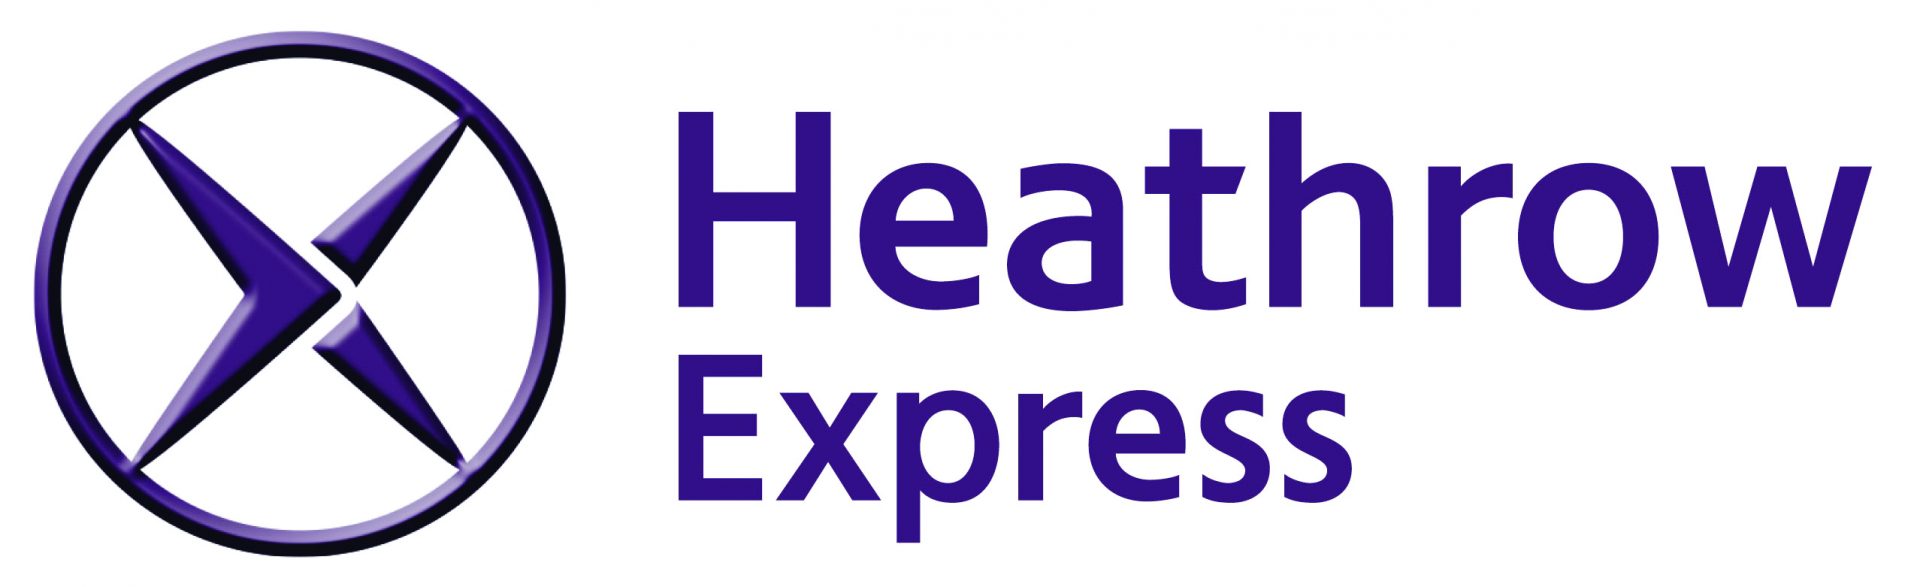 Heathrow Express and Uber offer seamless travel from plane to train and beyond